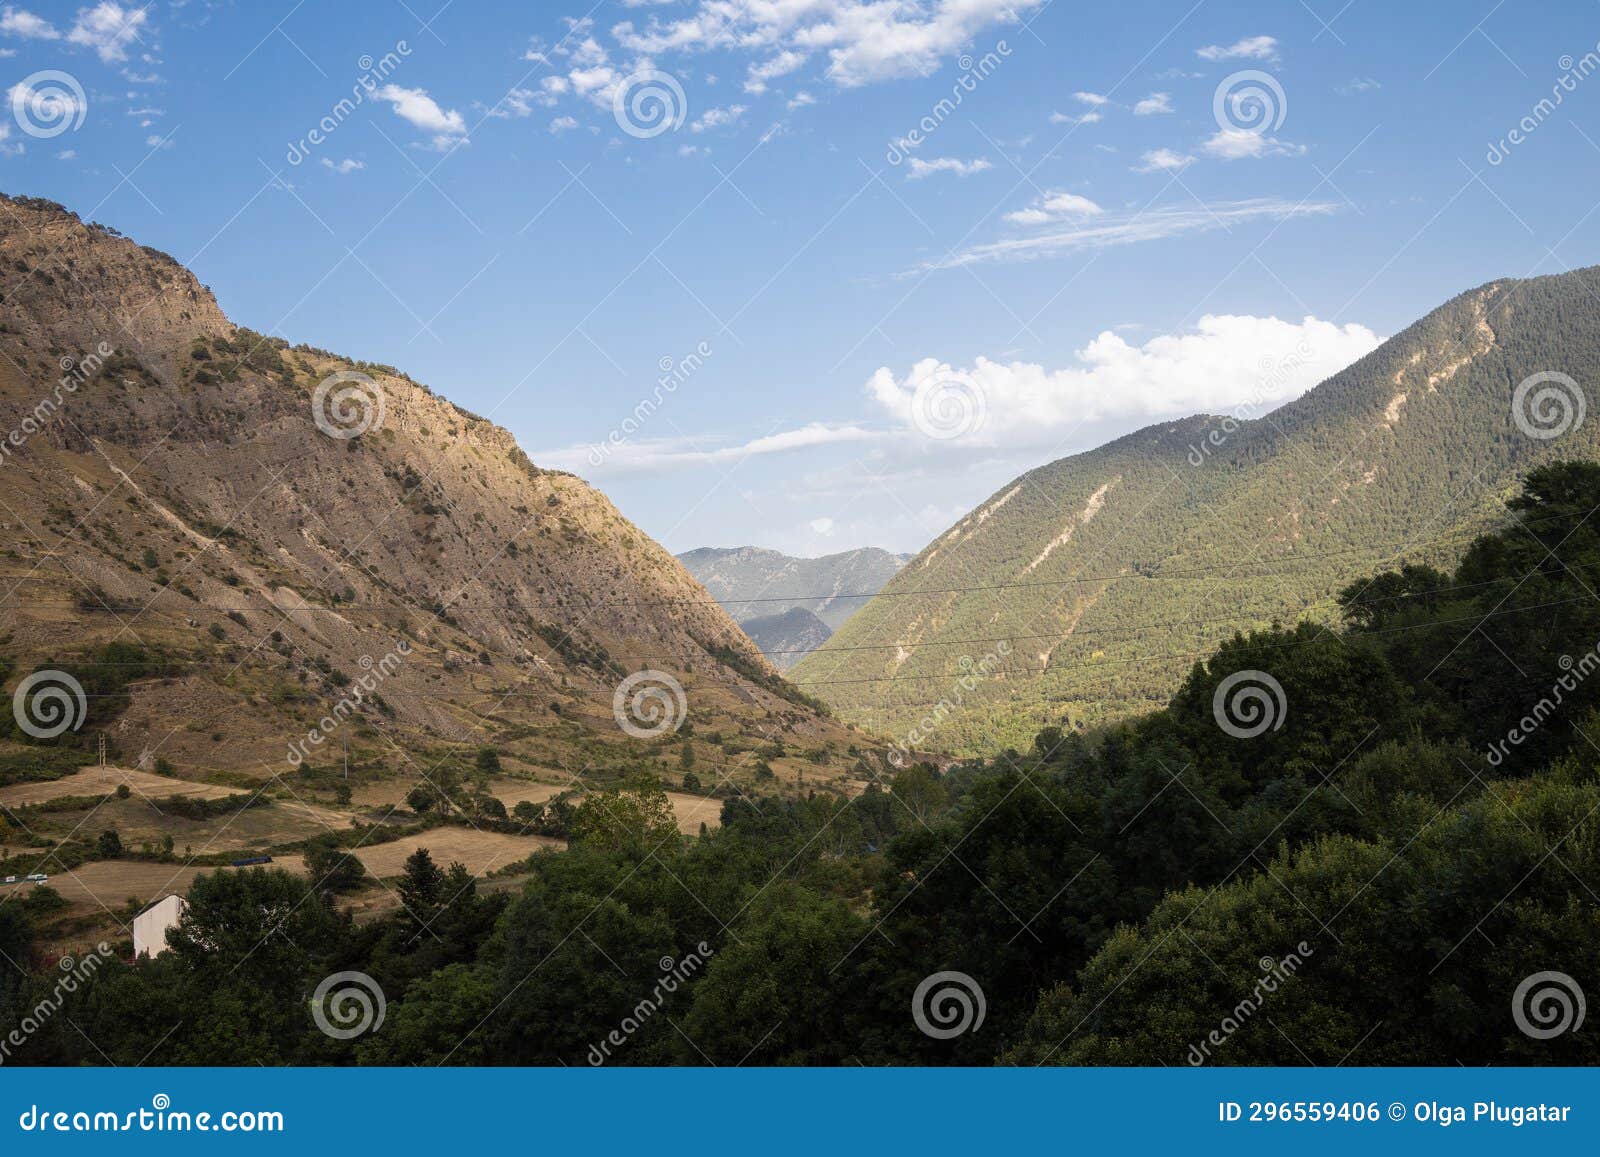 pyrenees mountains landscape in espot village at summer